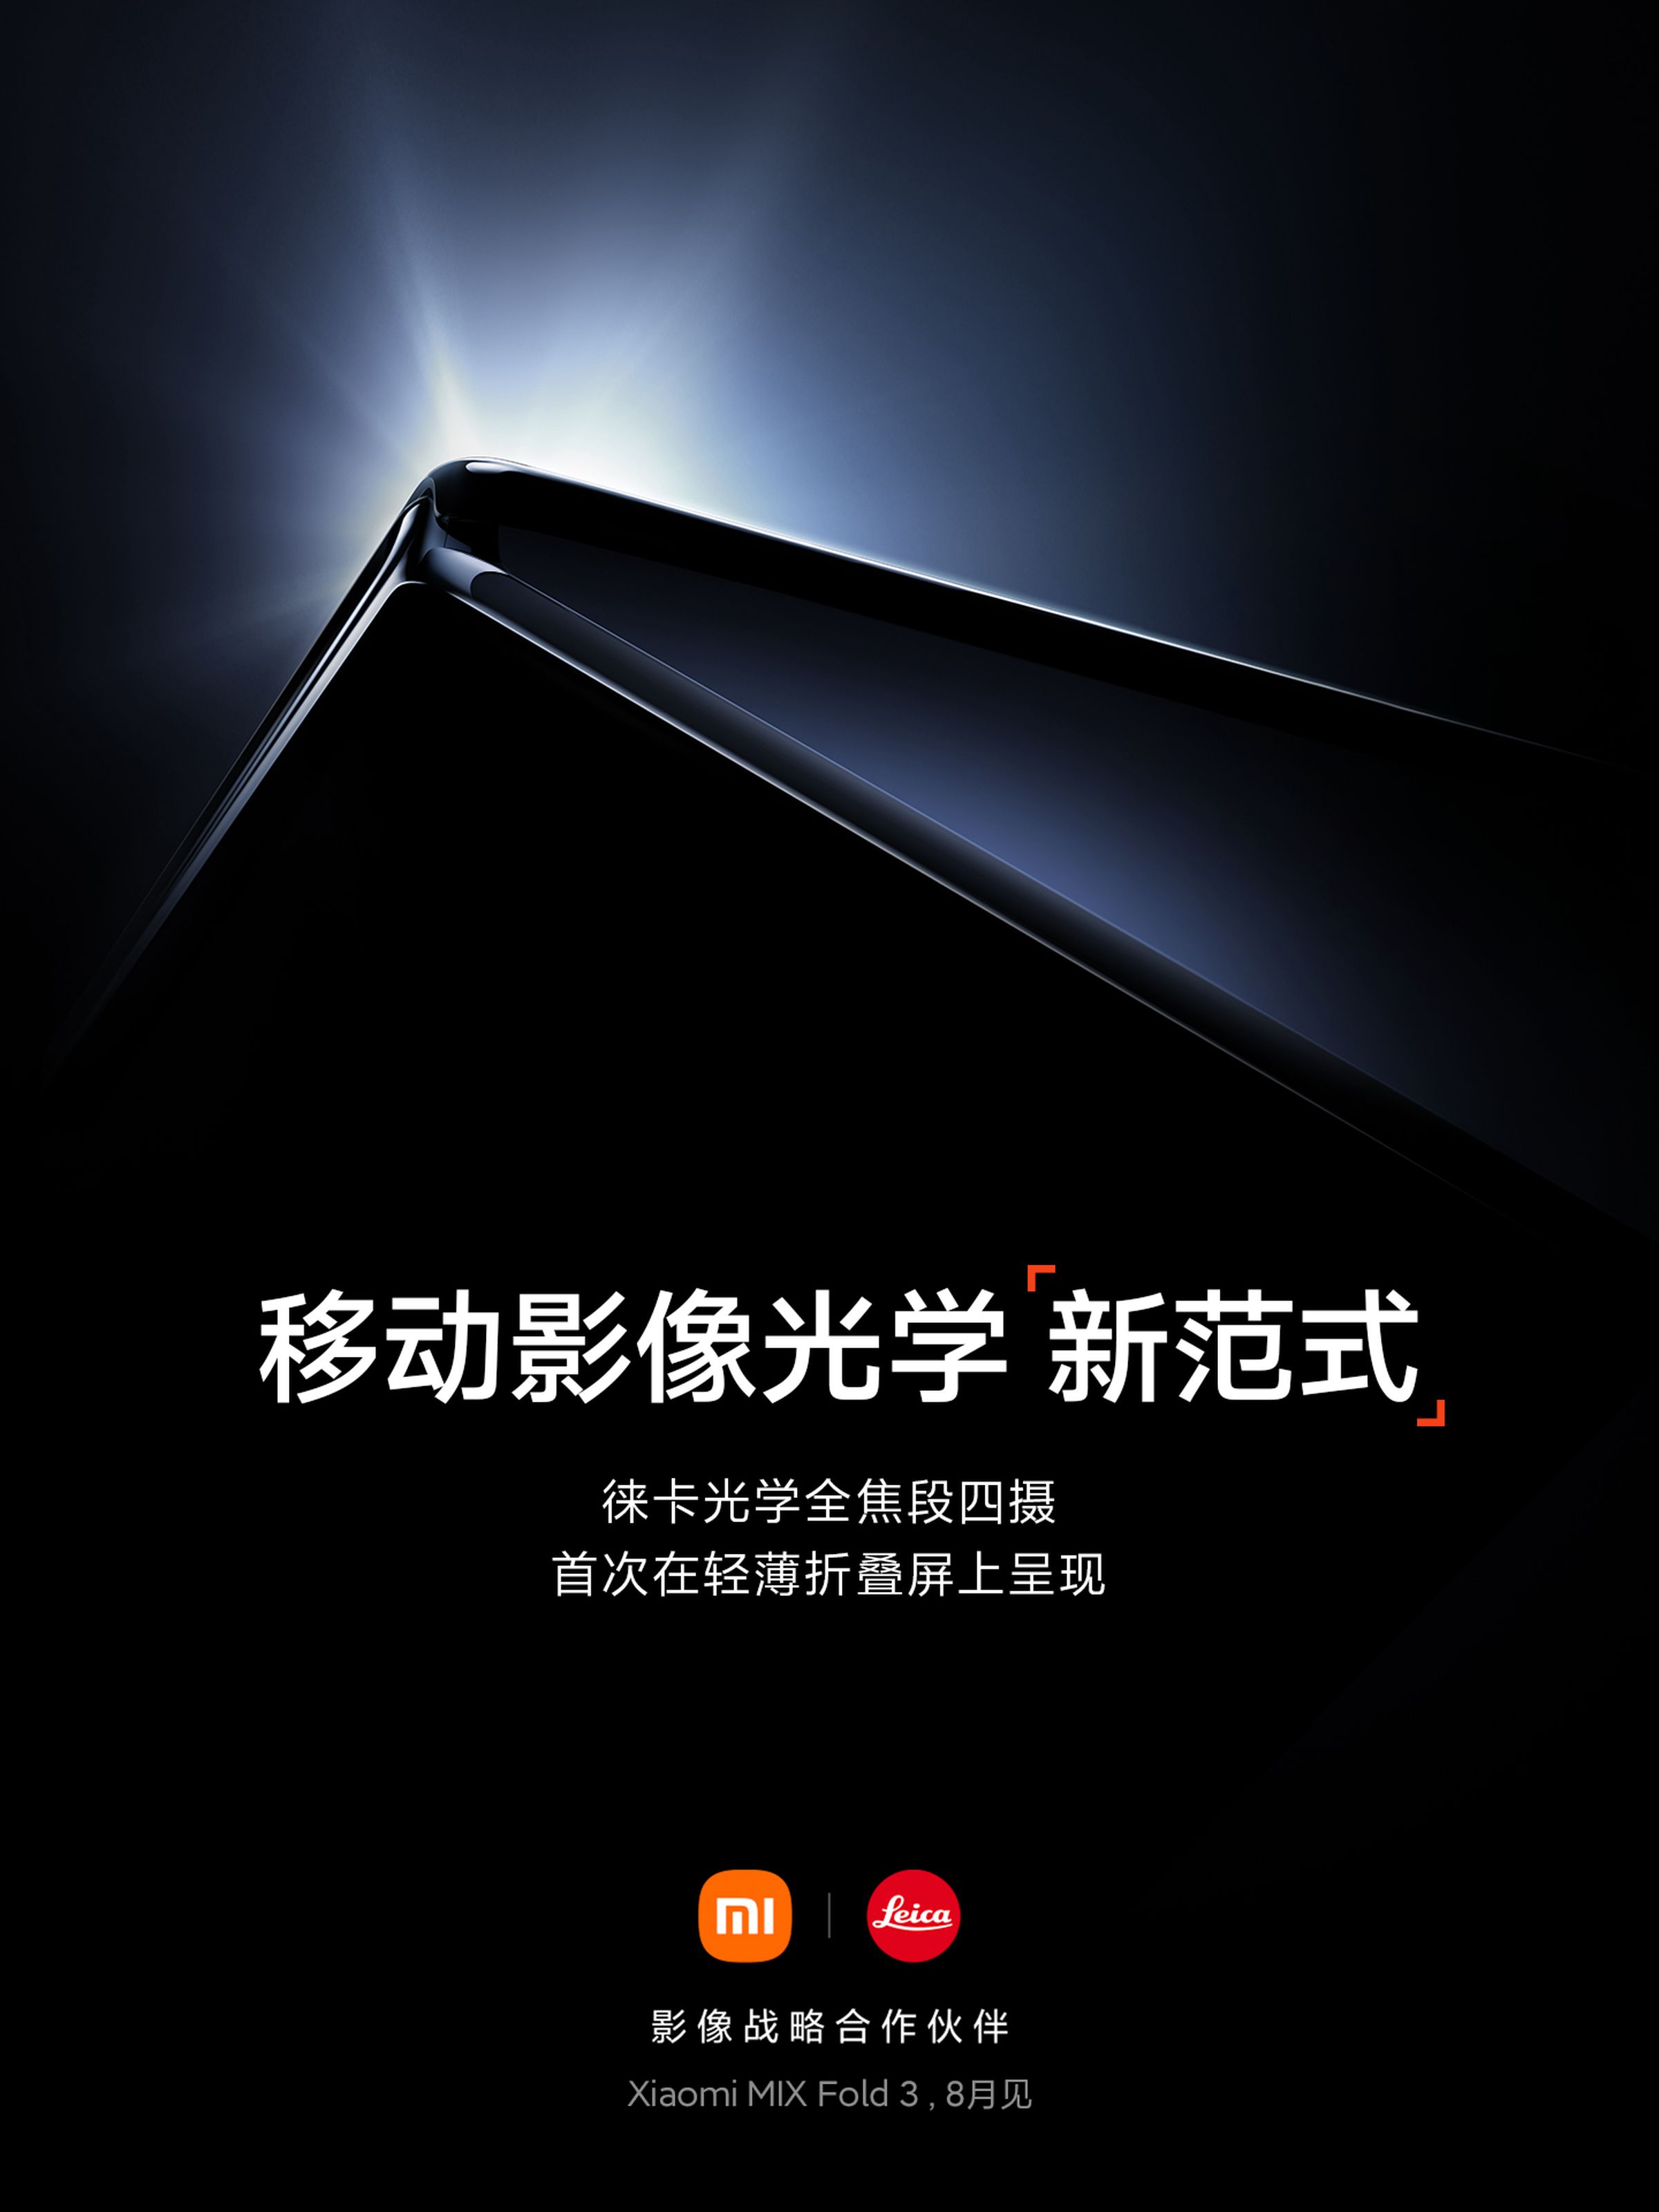 A promotional photo showing a foldable phone in shadow.